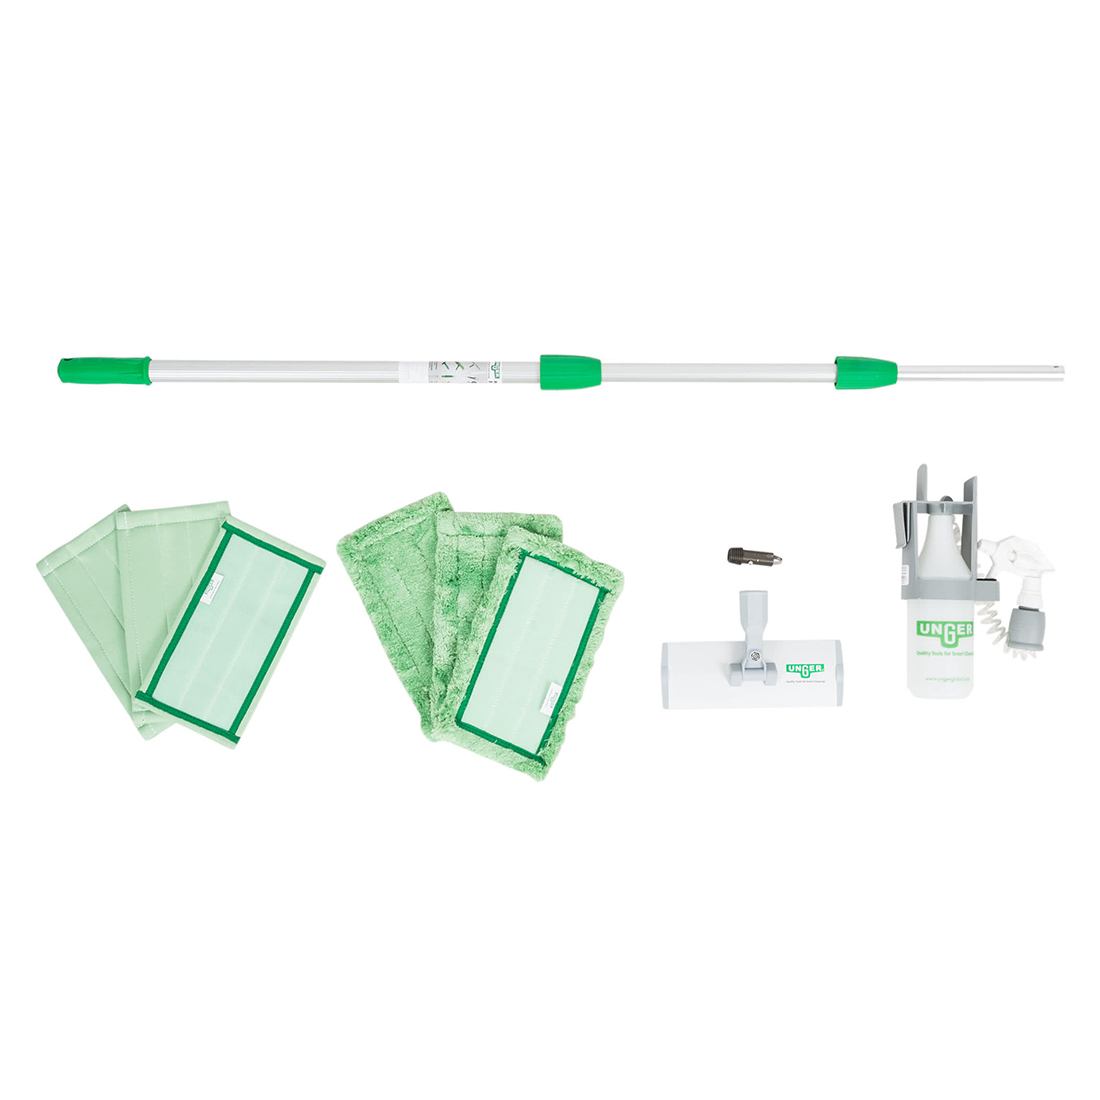 Unger SpeedClean Window Kit - Sprayer on a Belt, Pad Holder, Washing Pads, Cleaning Pads, 3-Section Pole - Horizontal Kit View